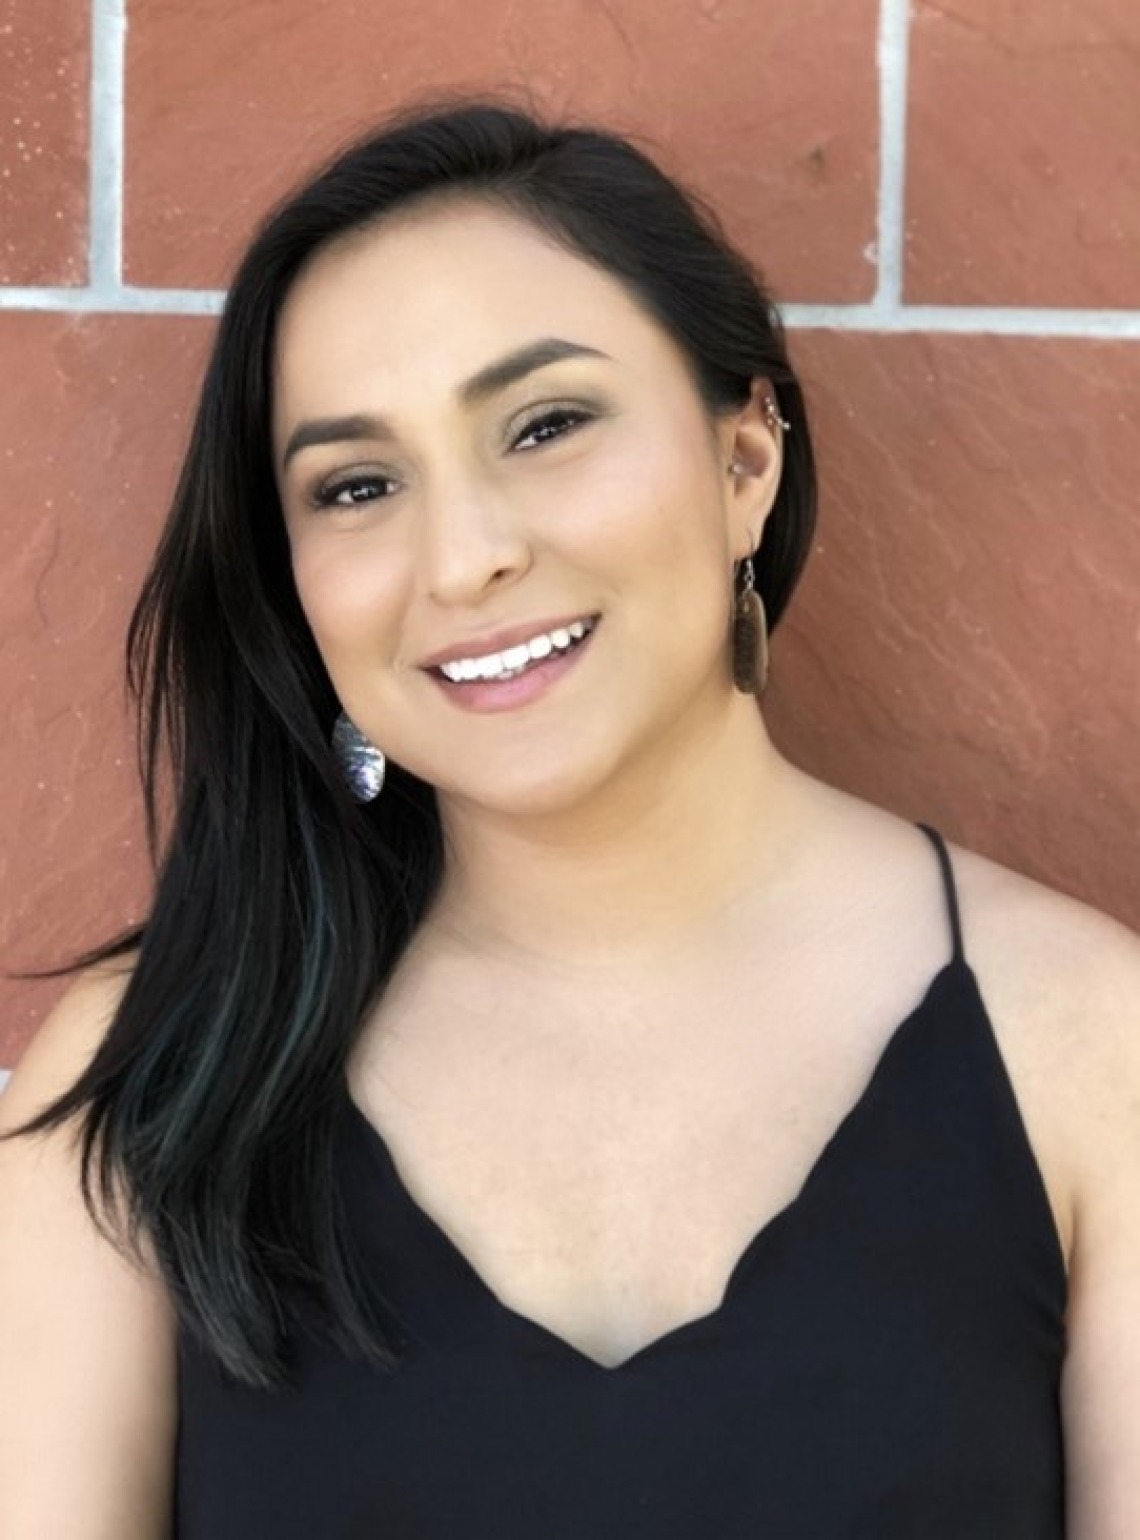 Zonnie Olivas, young Native woman in a black dress standing in front of a brick wall and smiling